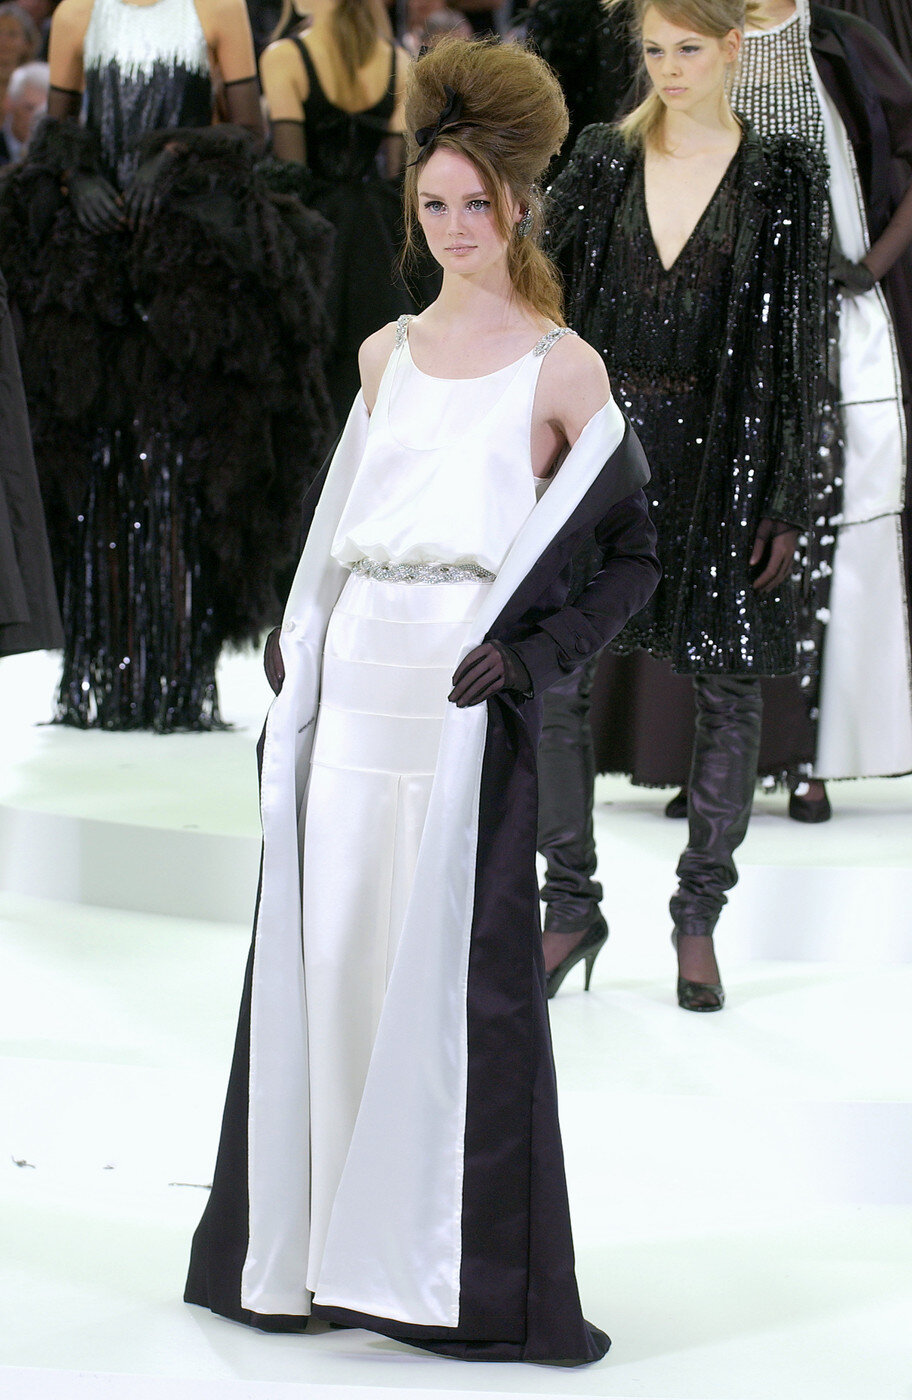 Chanel HC Silk Gown with Embellishments.jpg